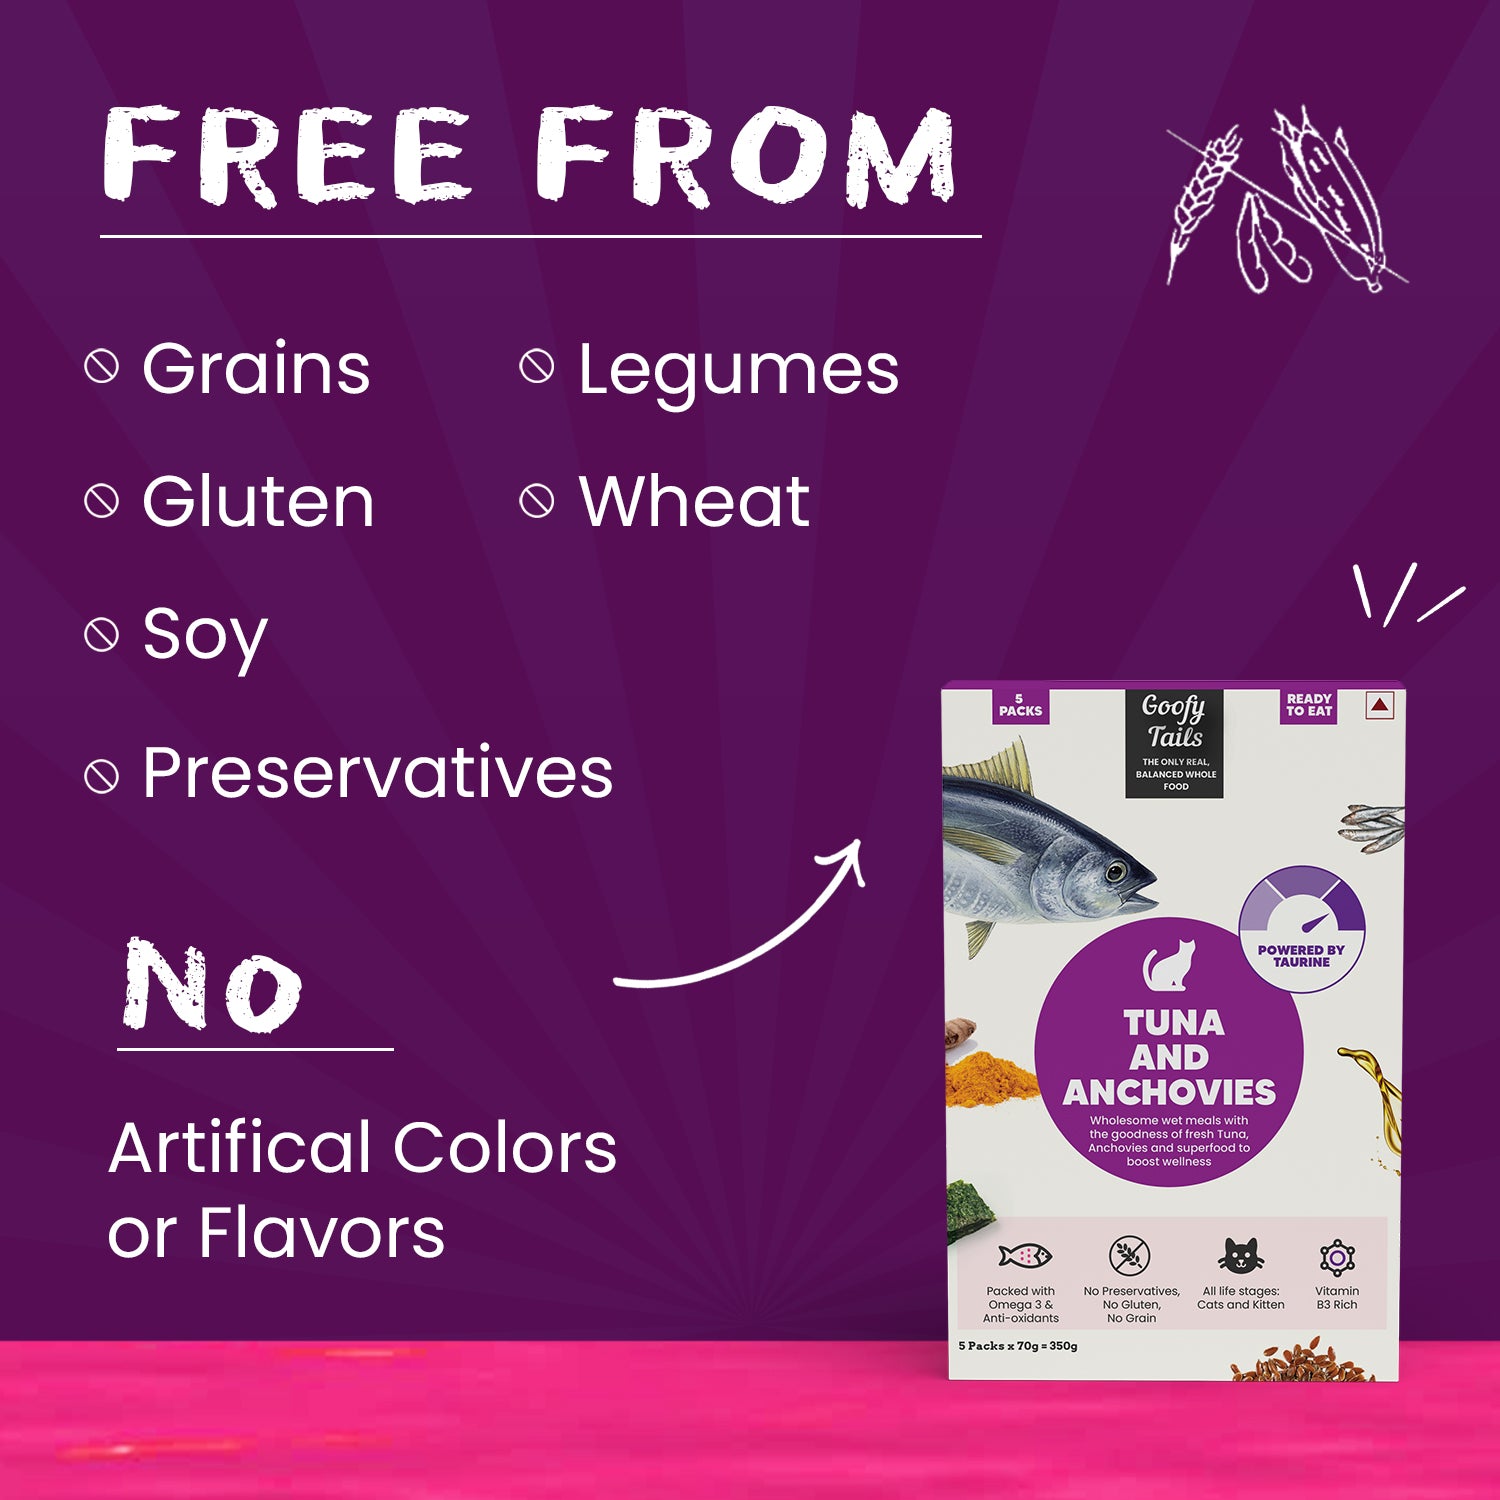 Grain-free cat food with tuna and anchovies for cats and kittens